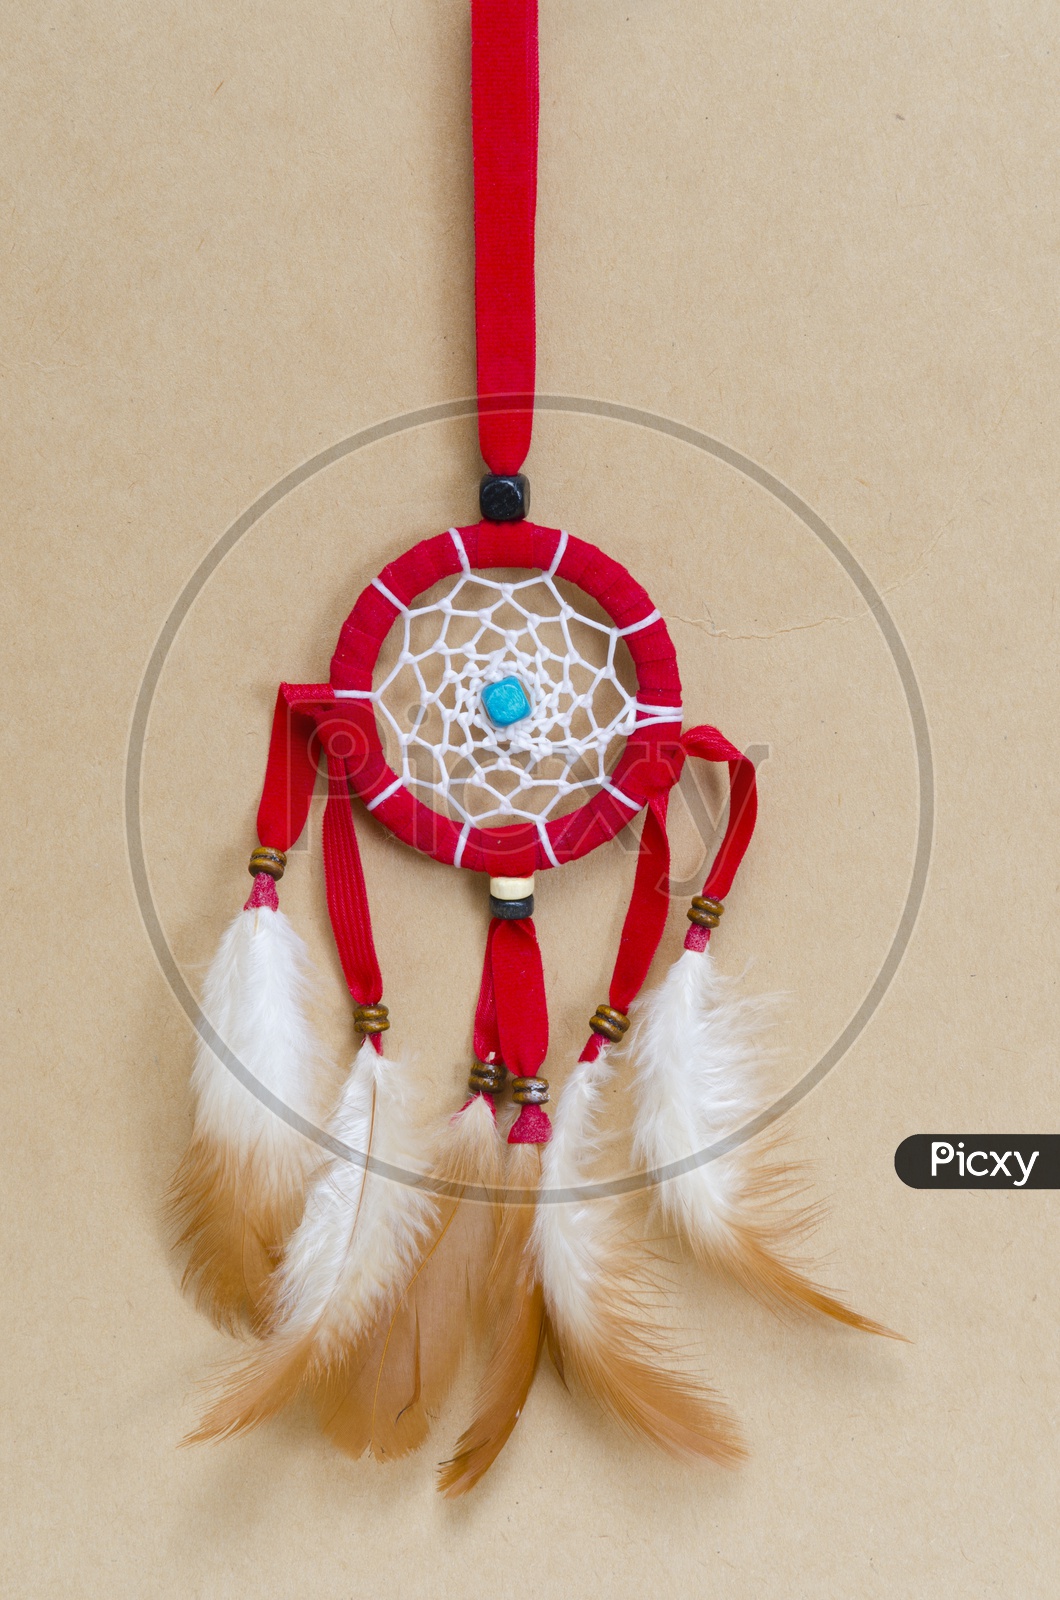 A Red dream-catcher on brown vintage background